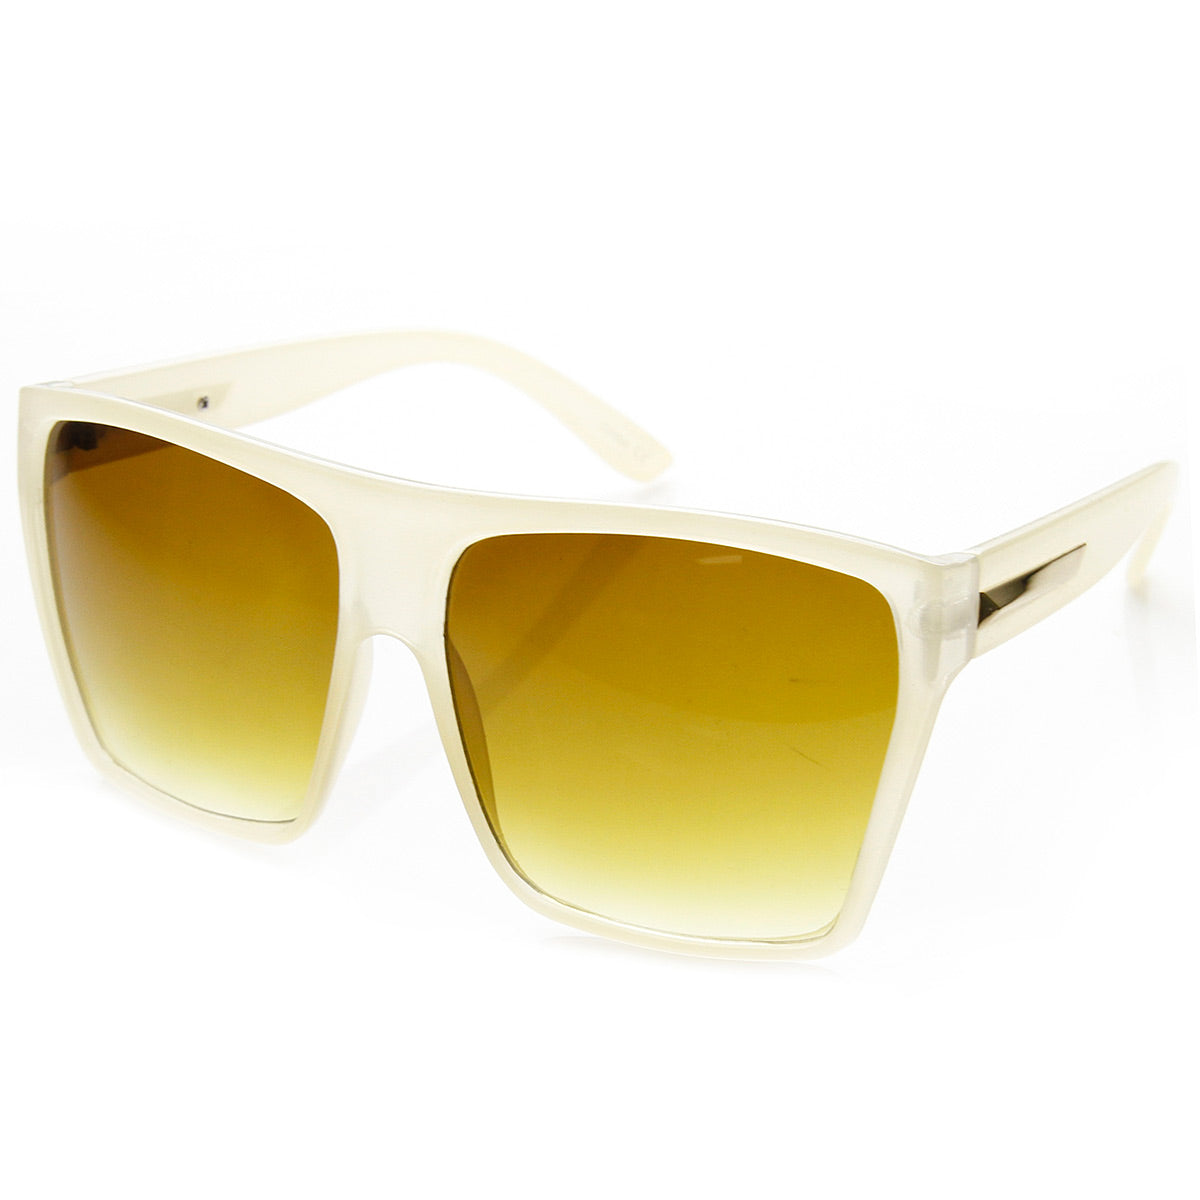 Luxury Retro Vintage Top Sunglasses For Men With Laser Logo And Shiny Gold  Plating Z0350W From Hellozhou8888, $48.69